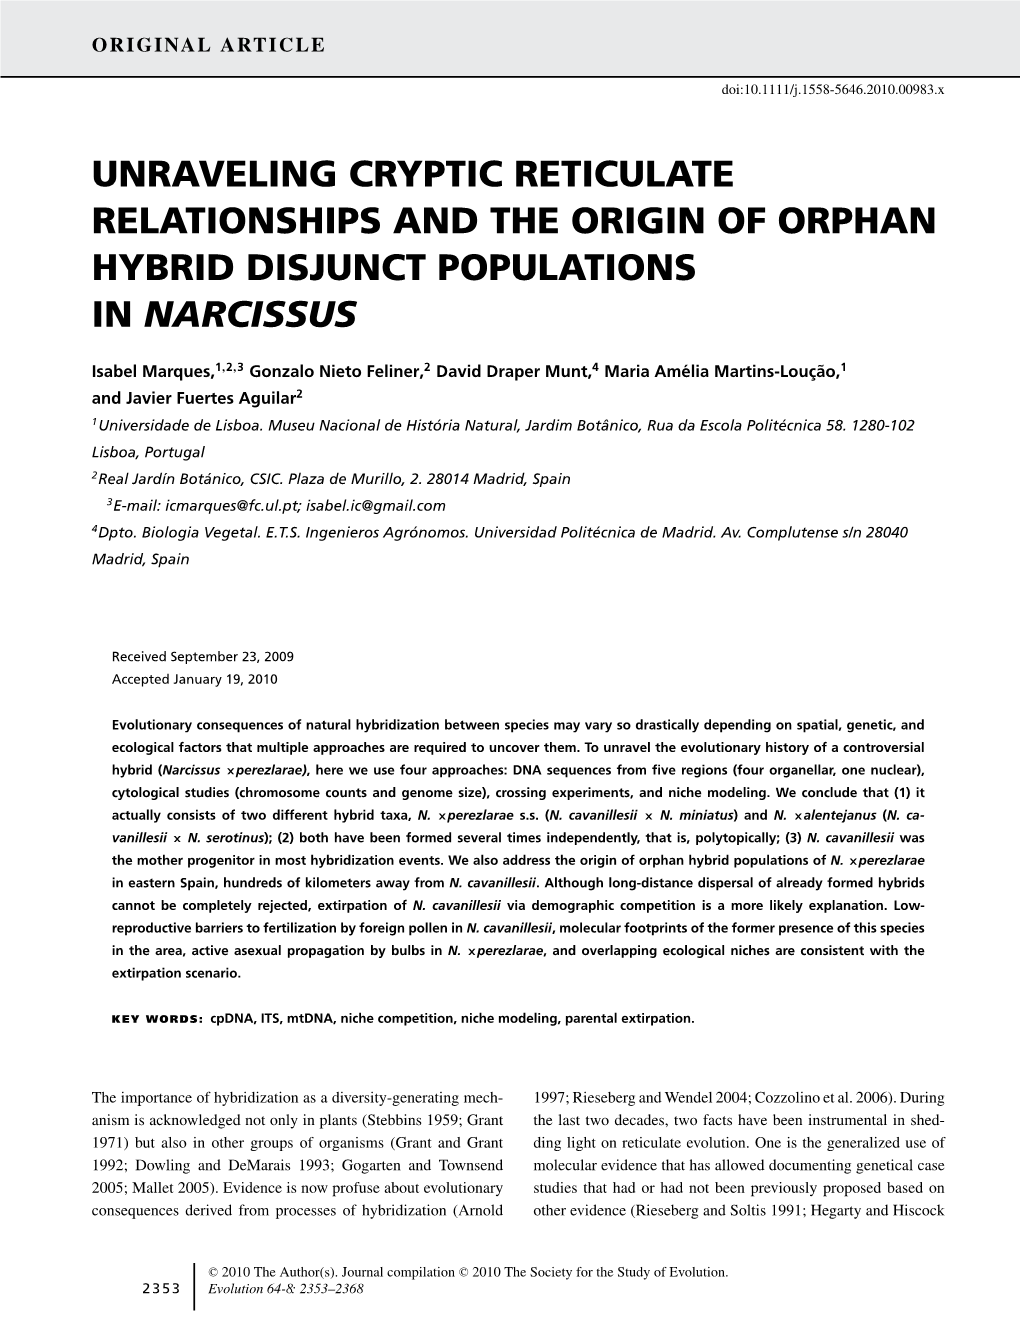 Unraveling Cryptic Reticulate Relationships and the Origin of Orphan Hybrid Disjunct Populations in Narcissus